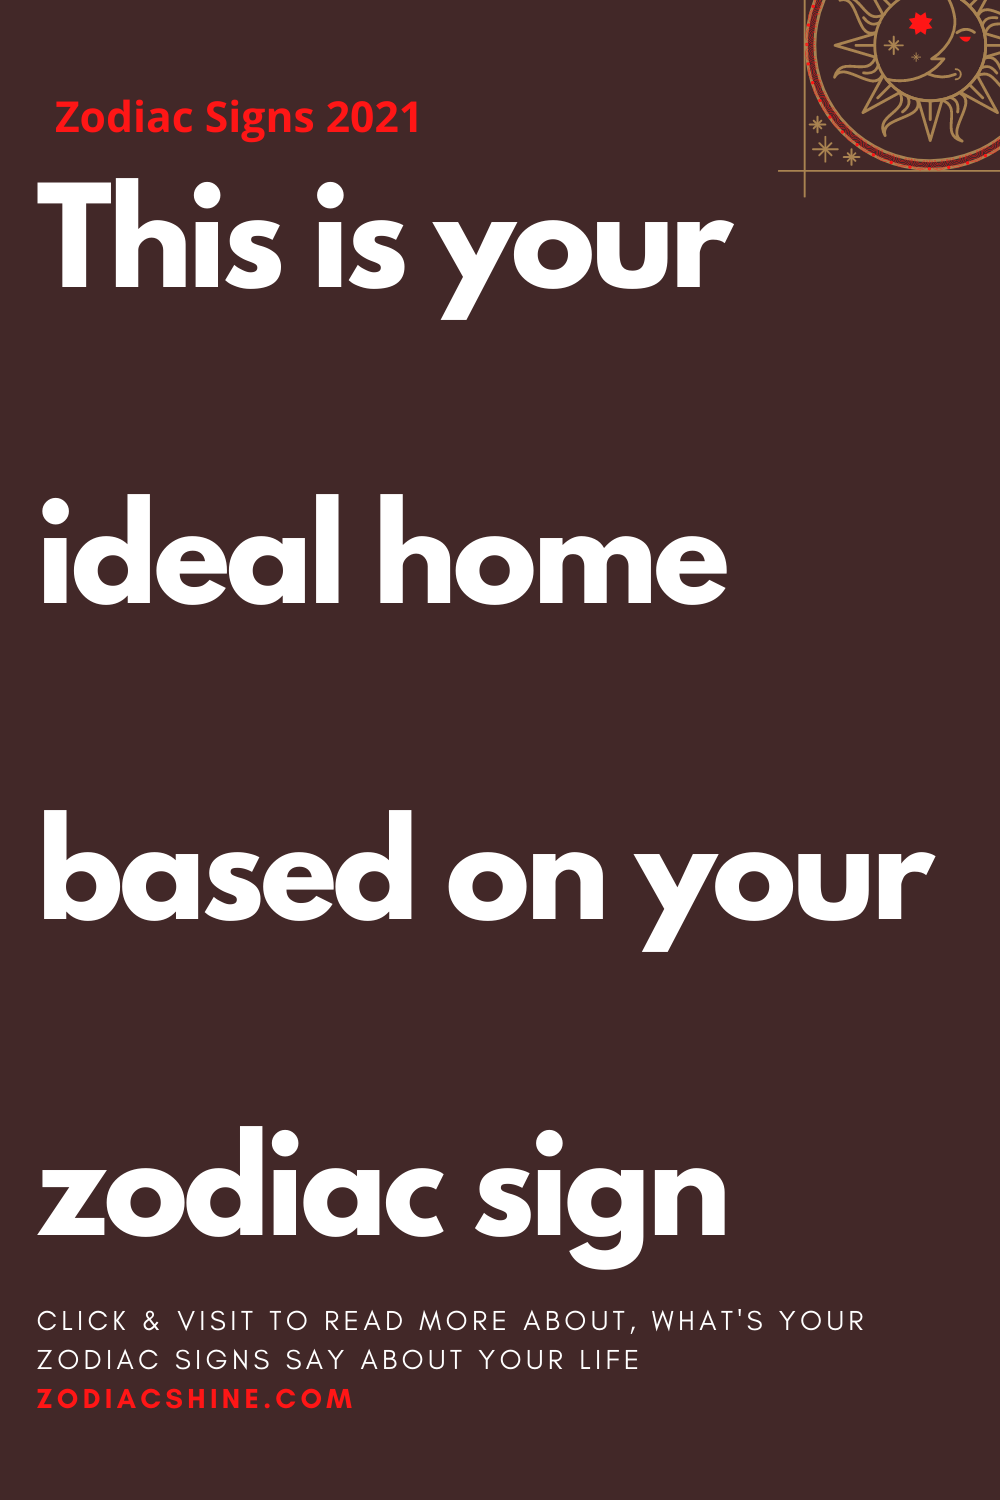 This is your ideal home based on your zodiac sign